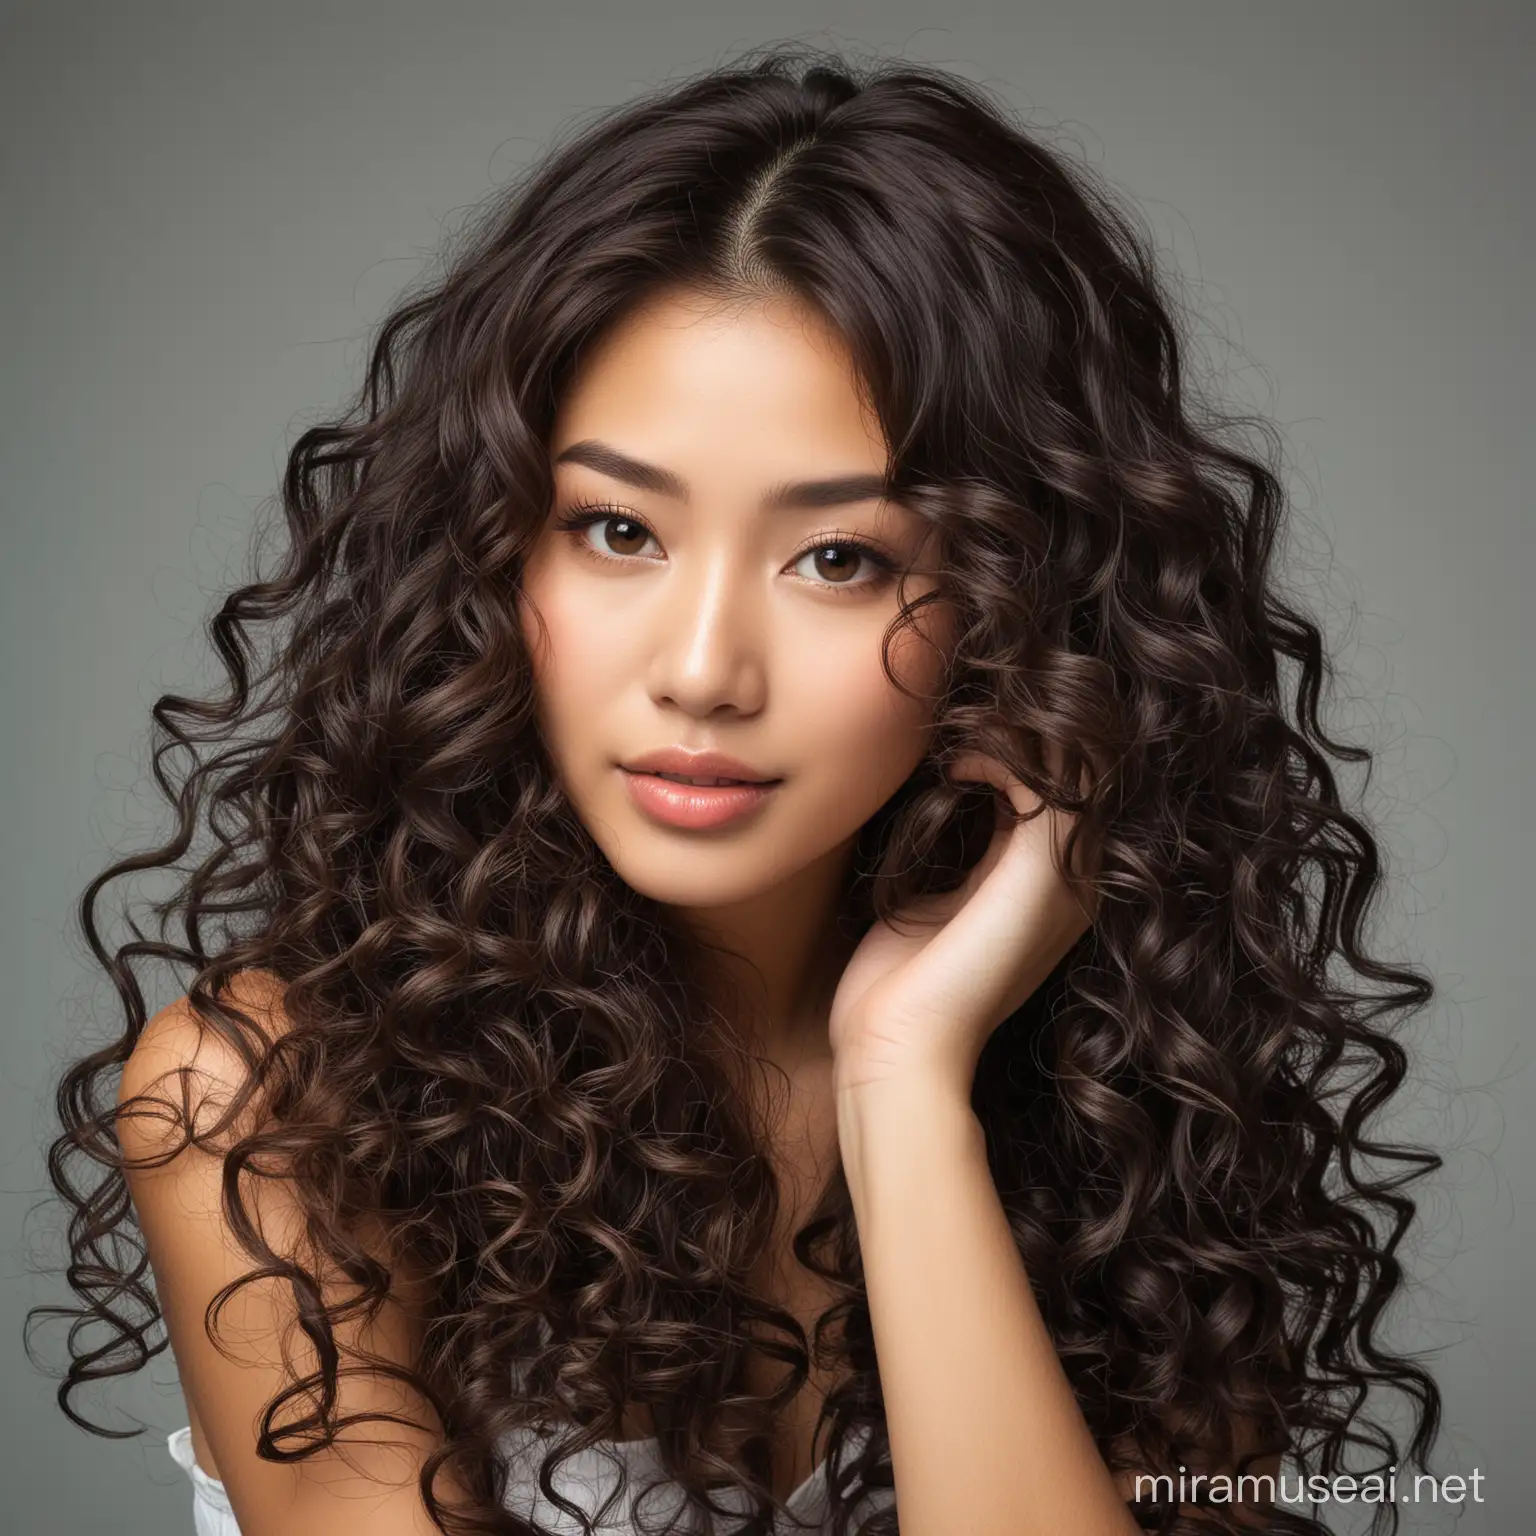 Elegant Asian Woman with Luxurious Curly Hair